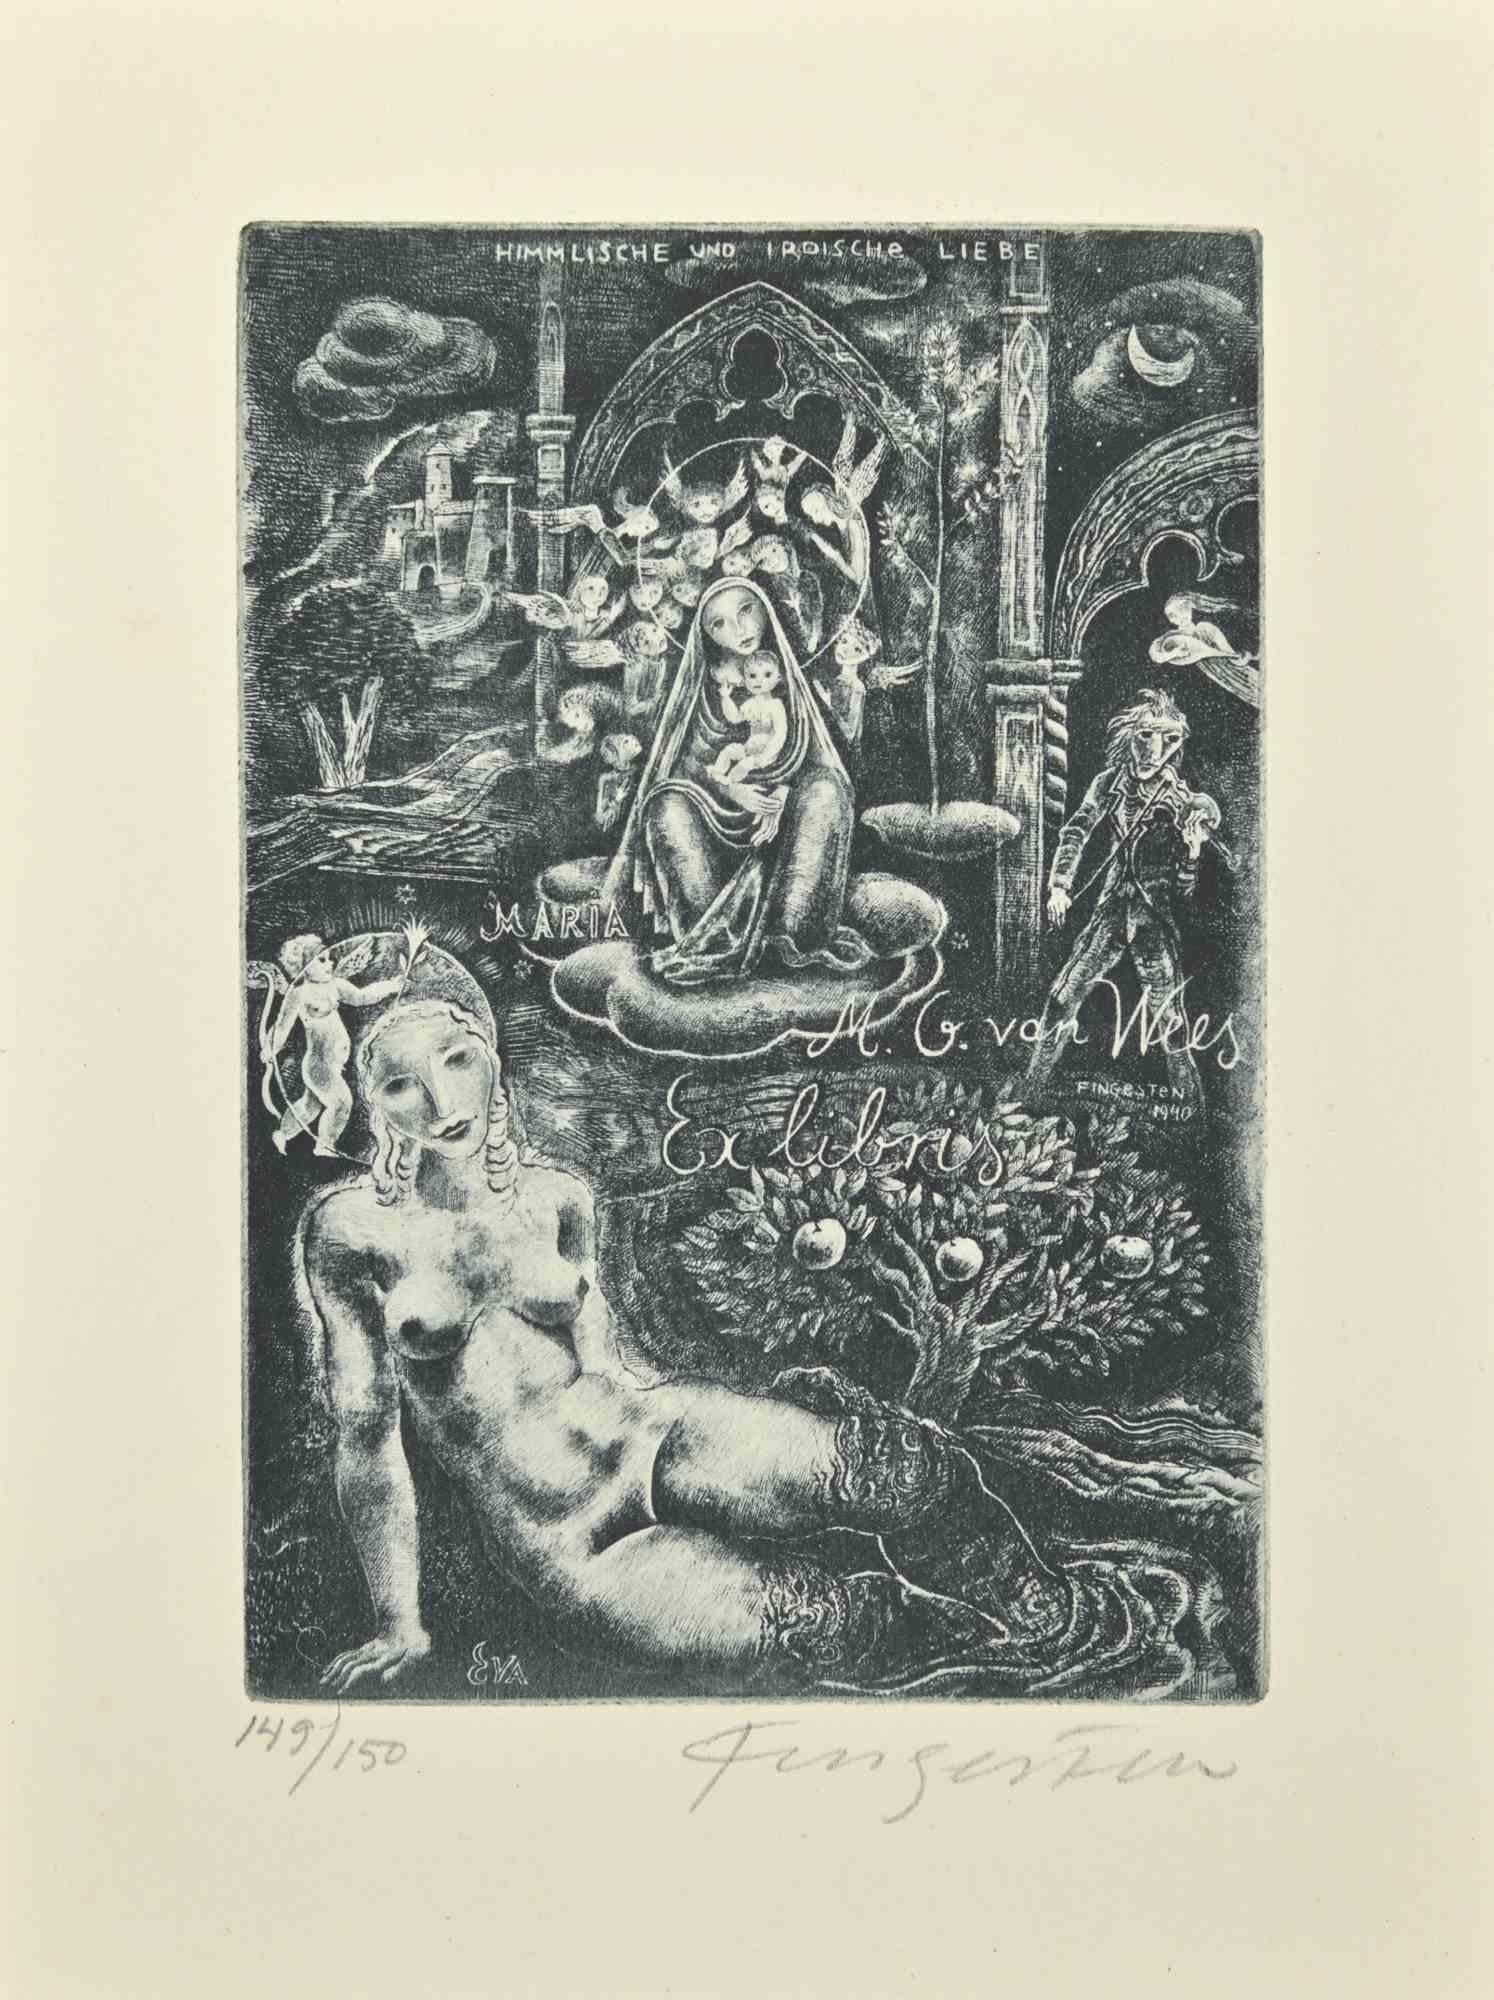 Ex Libris - M.G. Van Wees is an Etching print created by  Michel Fingesten in 1940.

Hand signed on the lower margin. Numbered on the left corner, ex. 149/150

Good conditions.

Michel Fingesten (1884 - 1943) was a Czech painter and engraver of